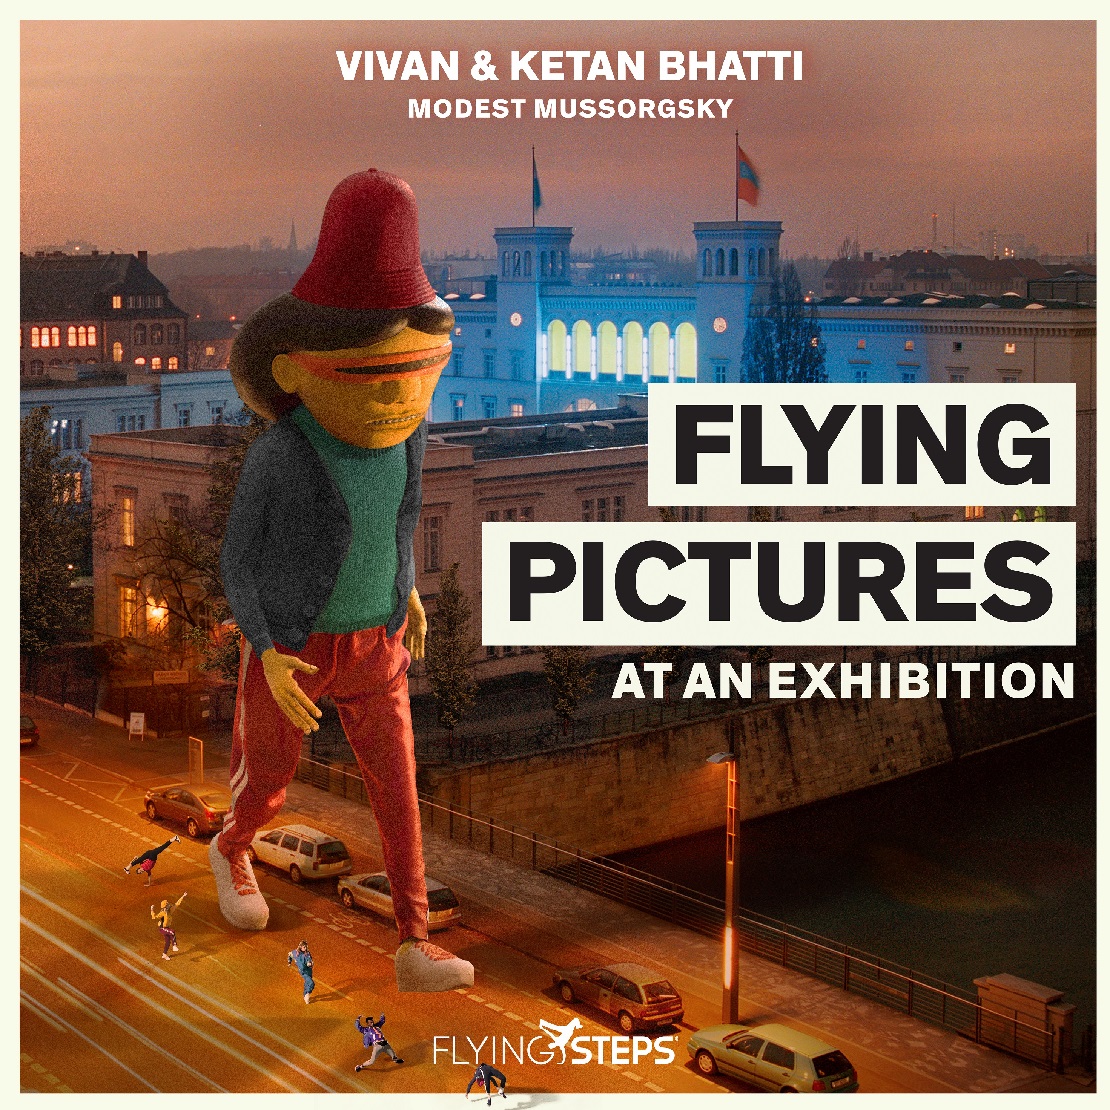 150 years of Pictures at an Exhibition in 2024 - Orchestral version by Ketan and Vivan Bhatti